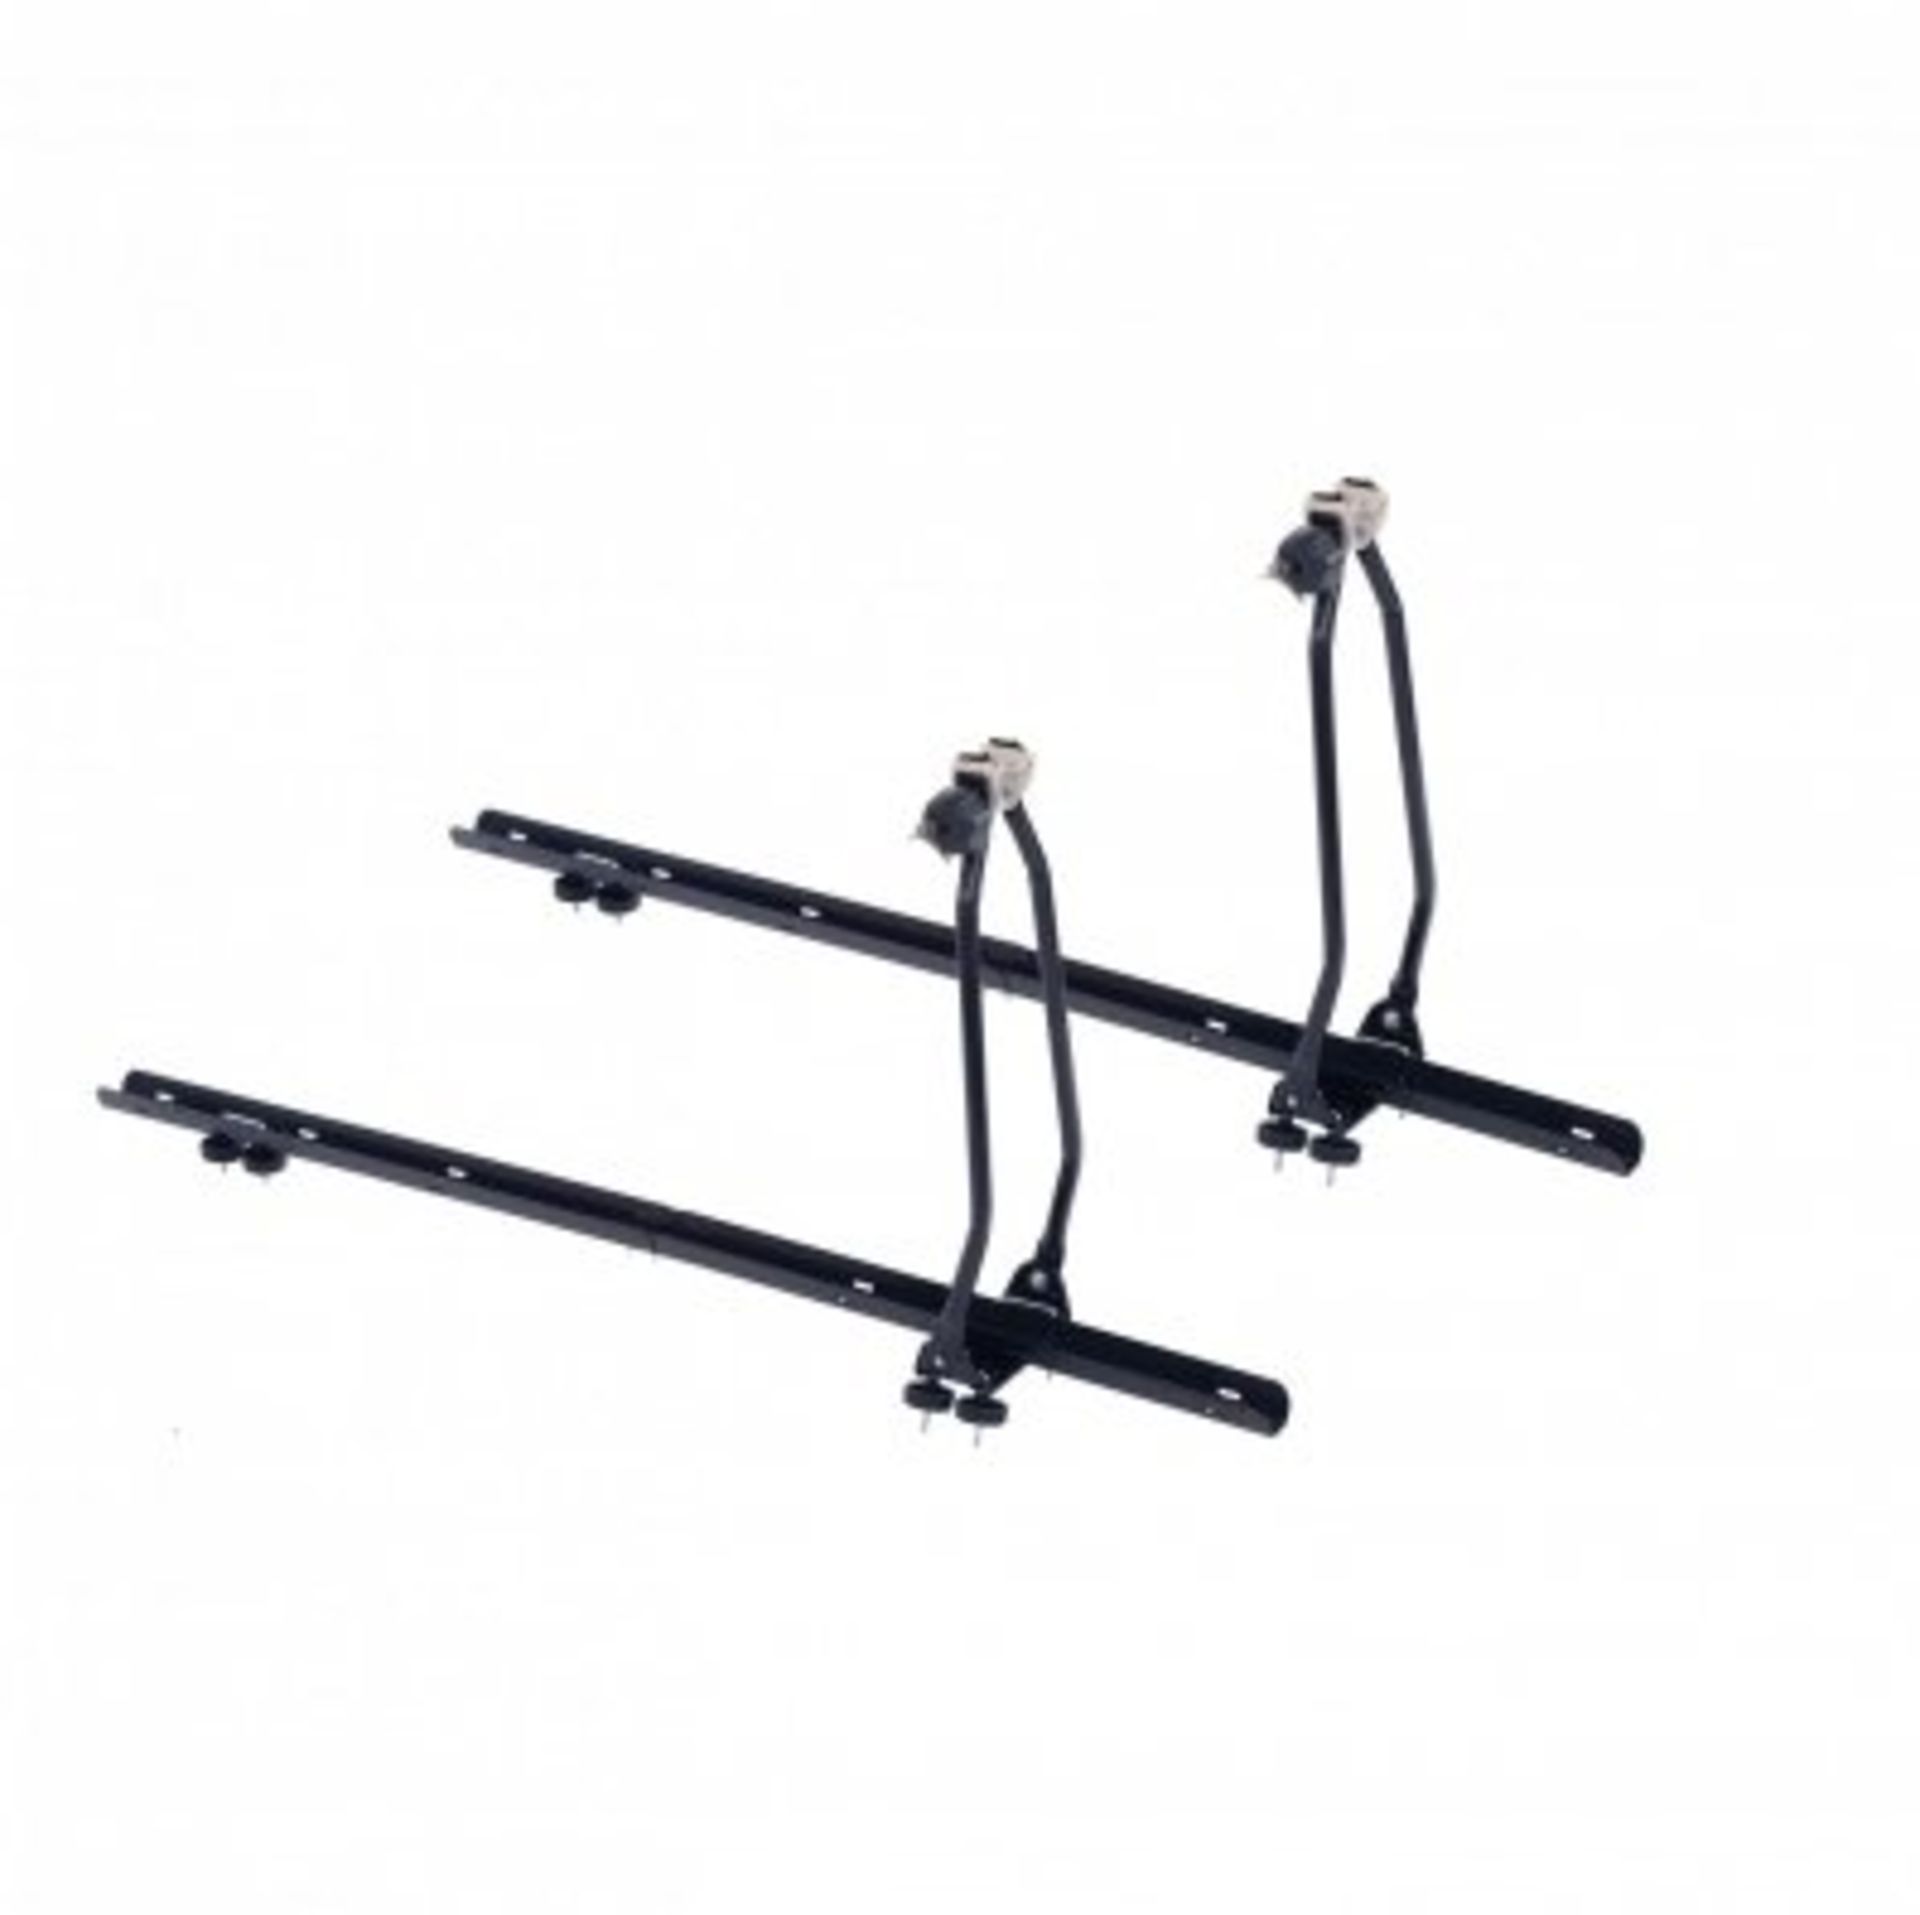 (PP555) 2x Universal Upright Lockable Roof Mounted Bike Bicycle Rack Bar Carriers The univ...